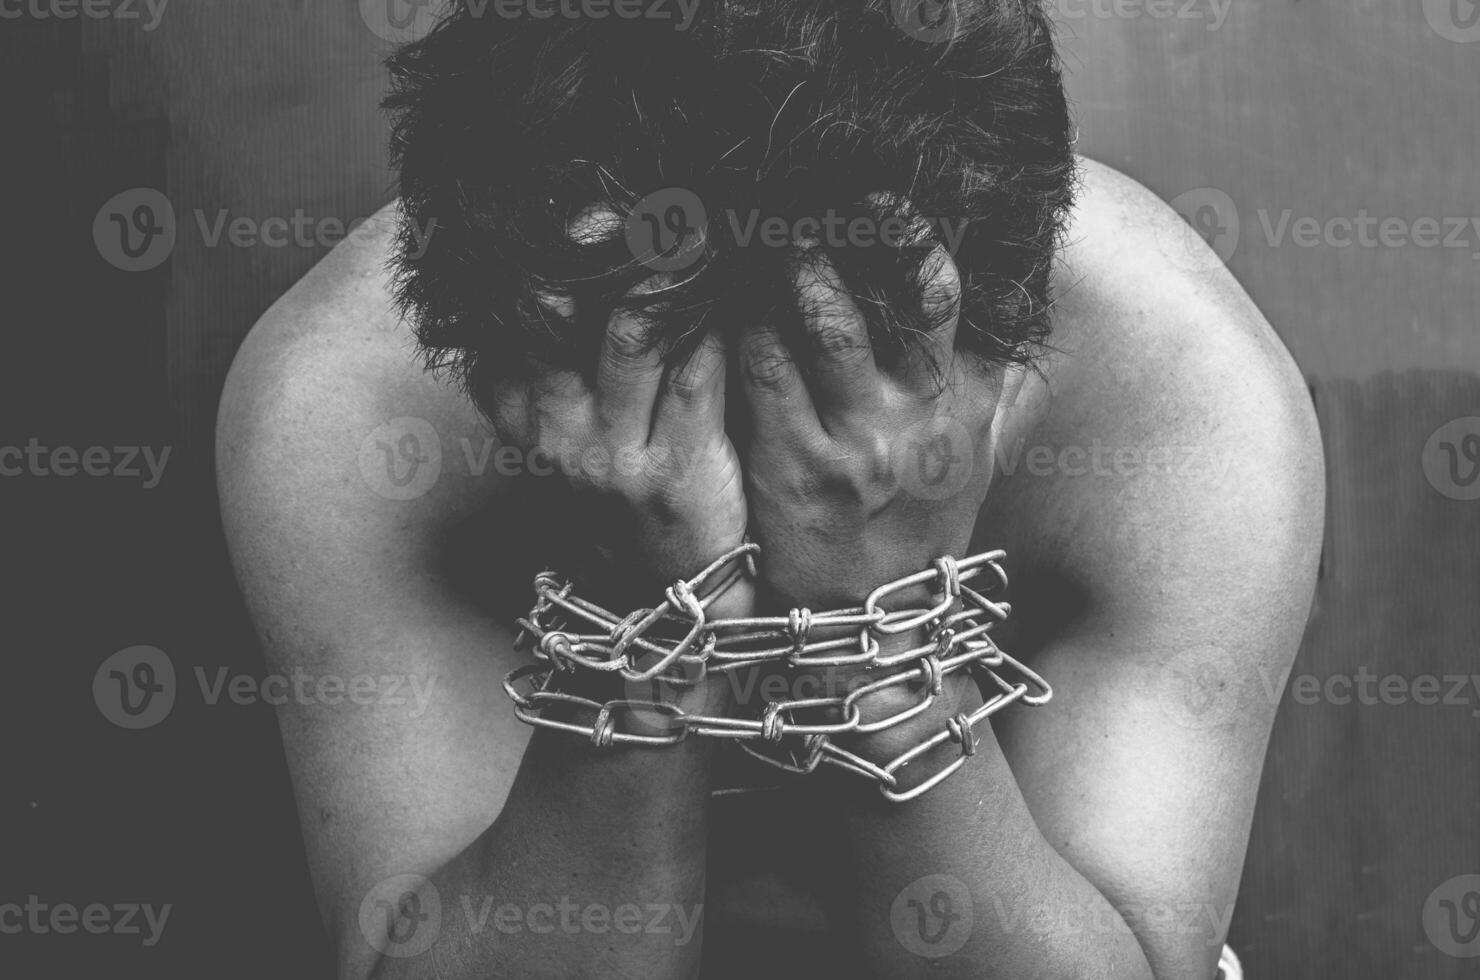 male prisoners are being Interpreting at the wrist chains are strain - tone black and white photo